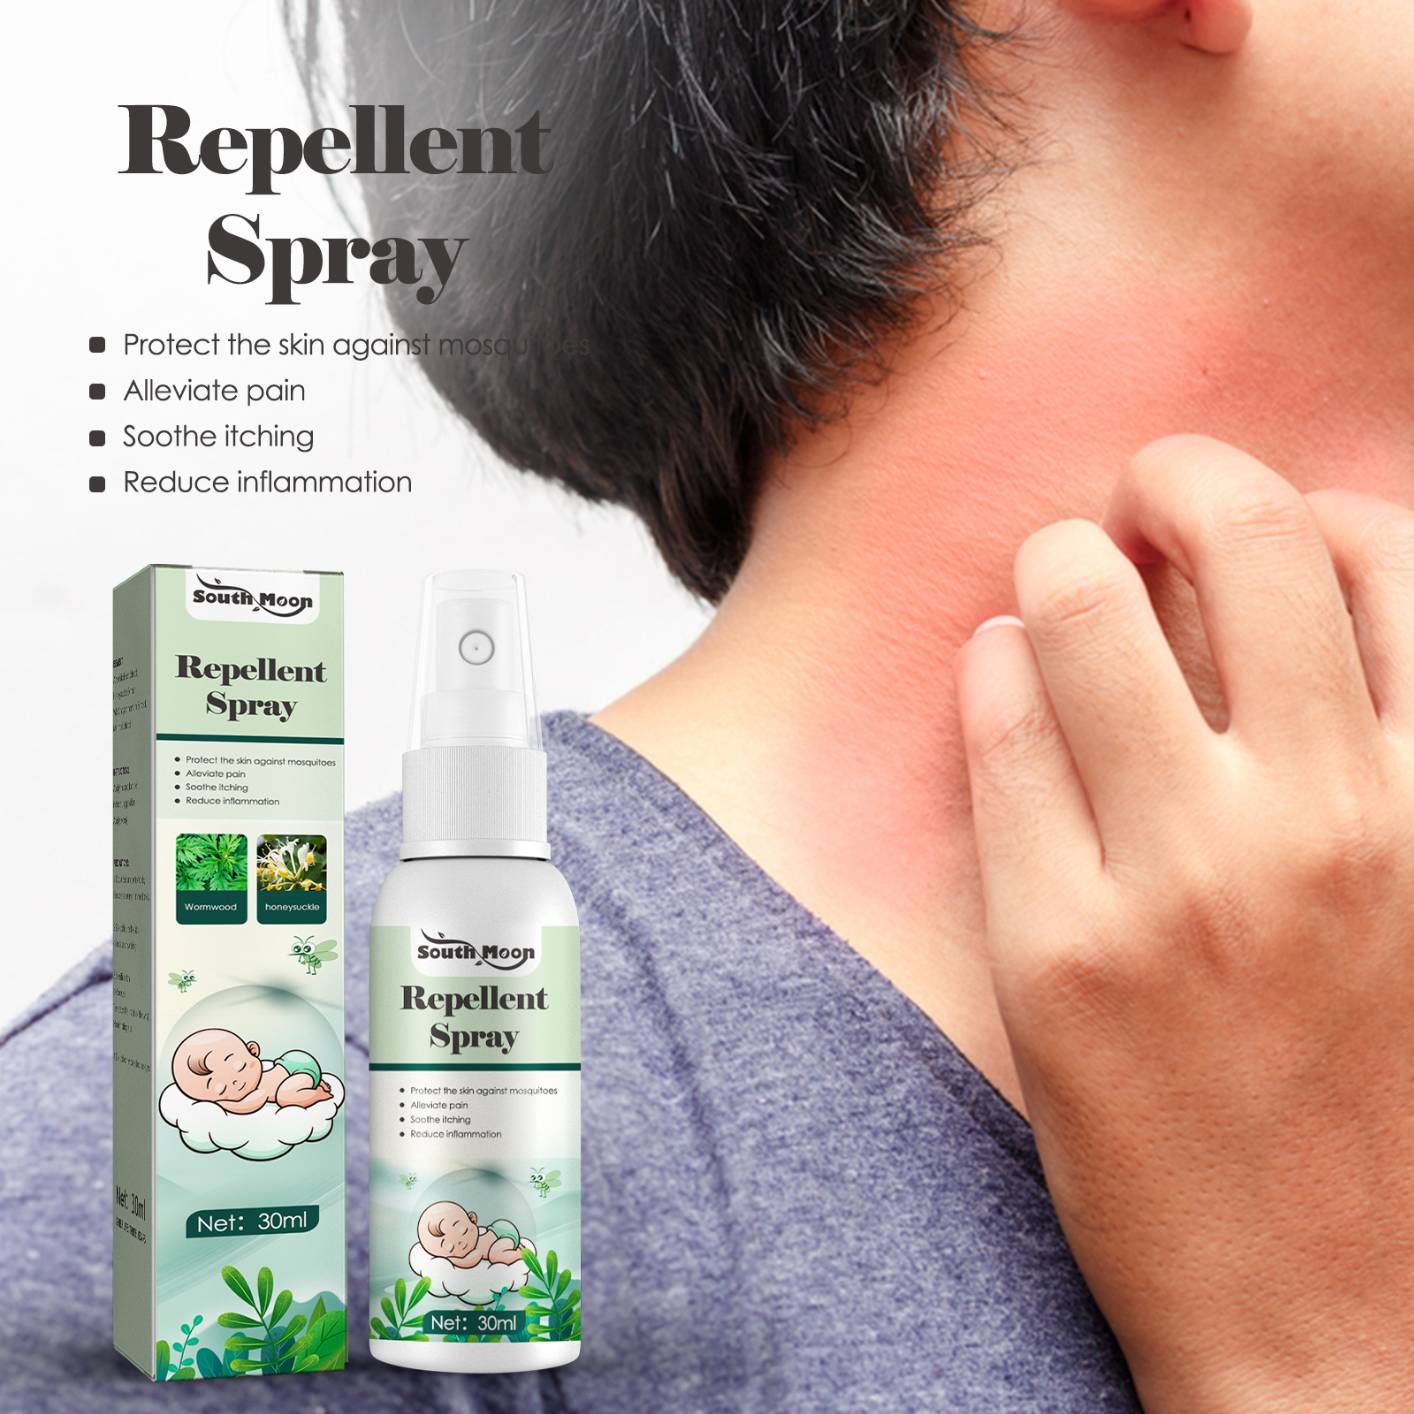 Organic Herbal Anti-Bug Spray Mosquito Repelling Spray Cooling Anti-Itch Continuous Spray Relief from Outdoor Bug Bite Itches, Travel Size
